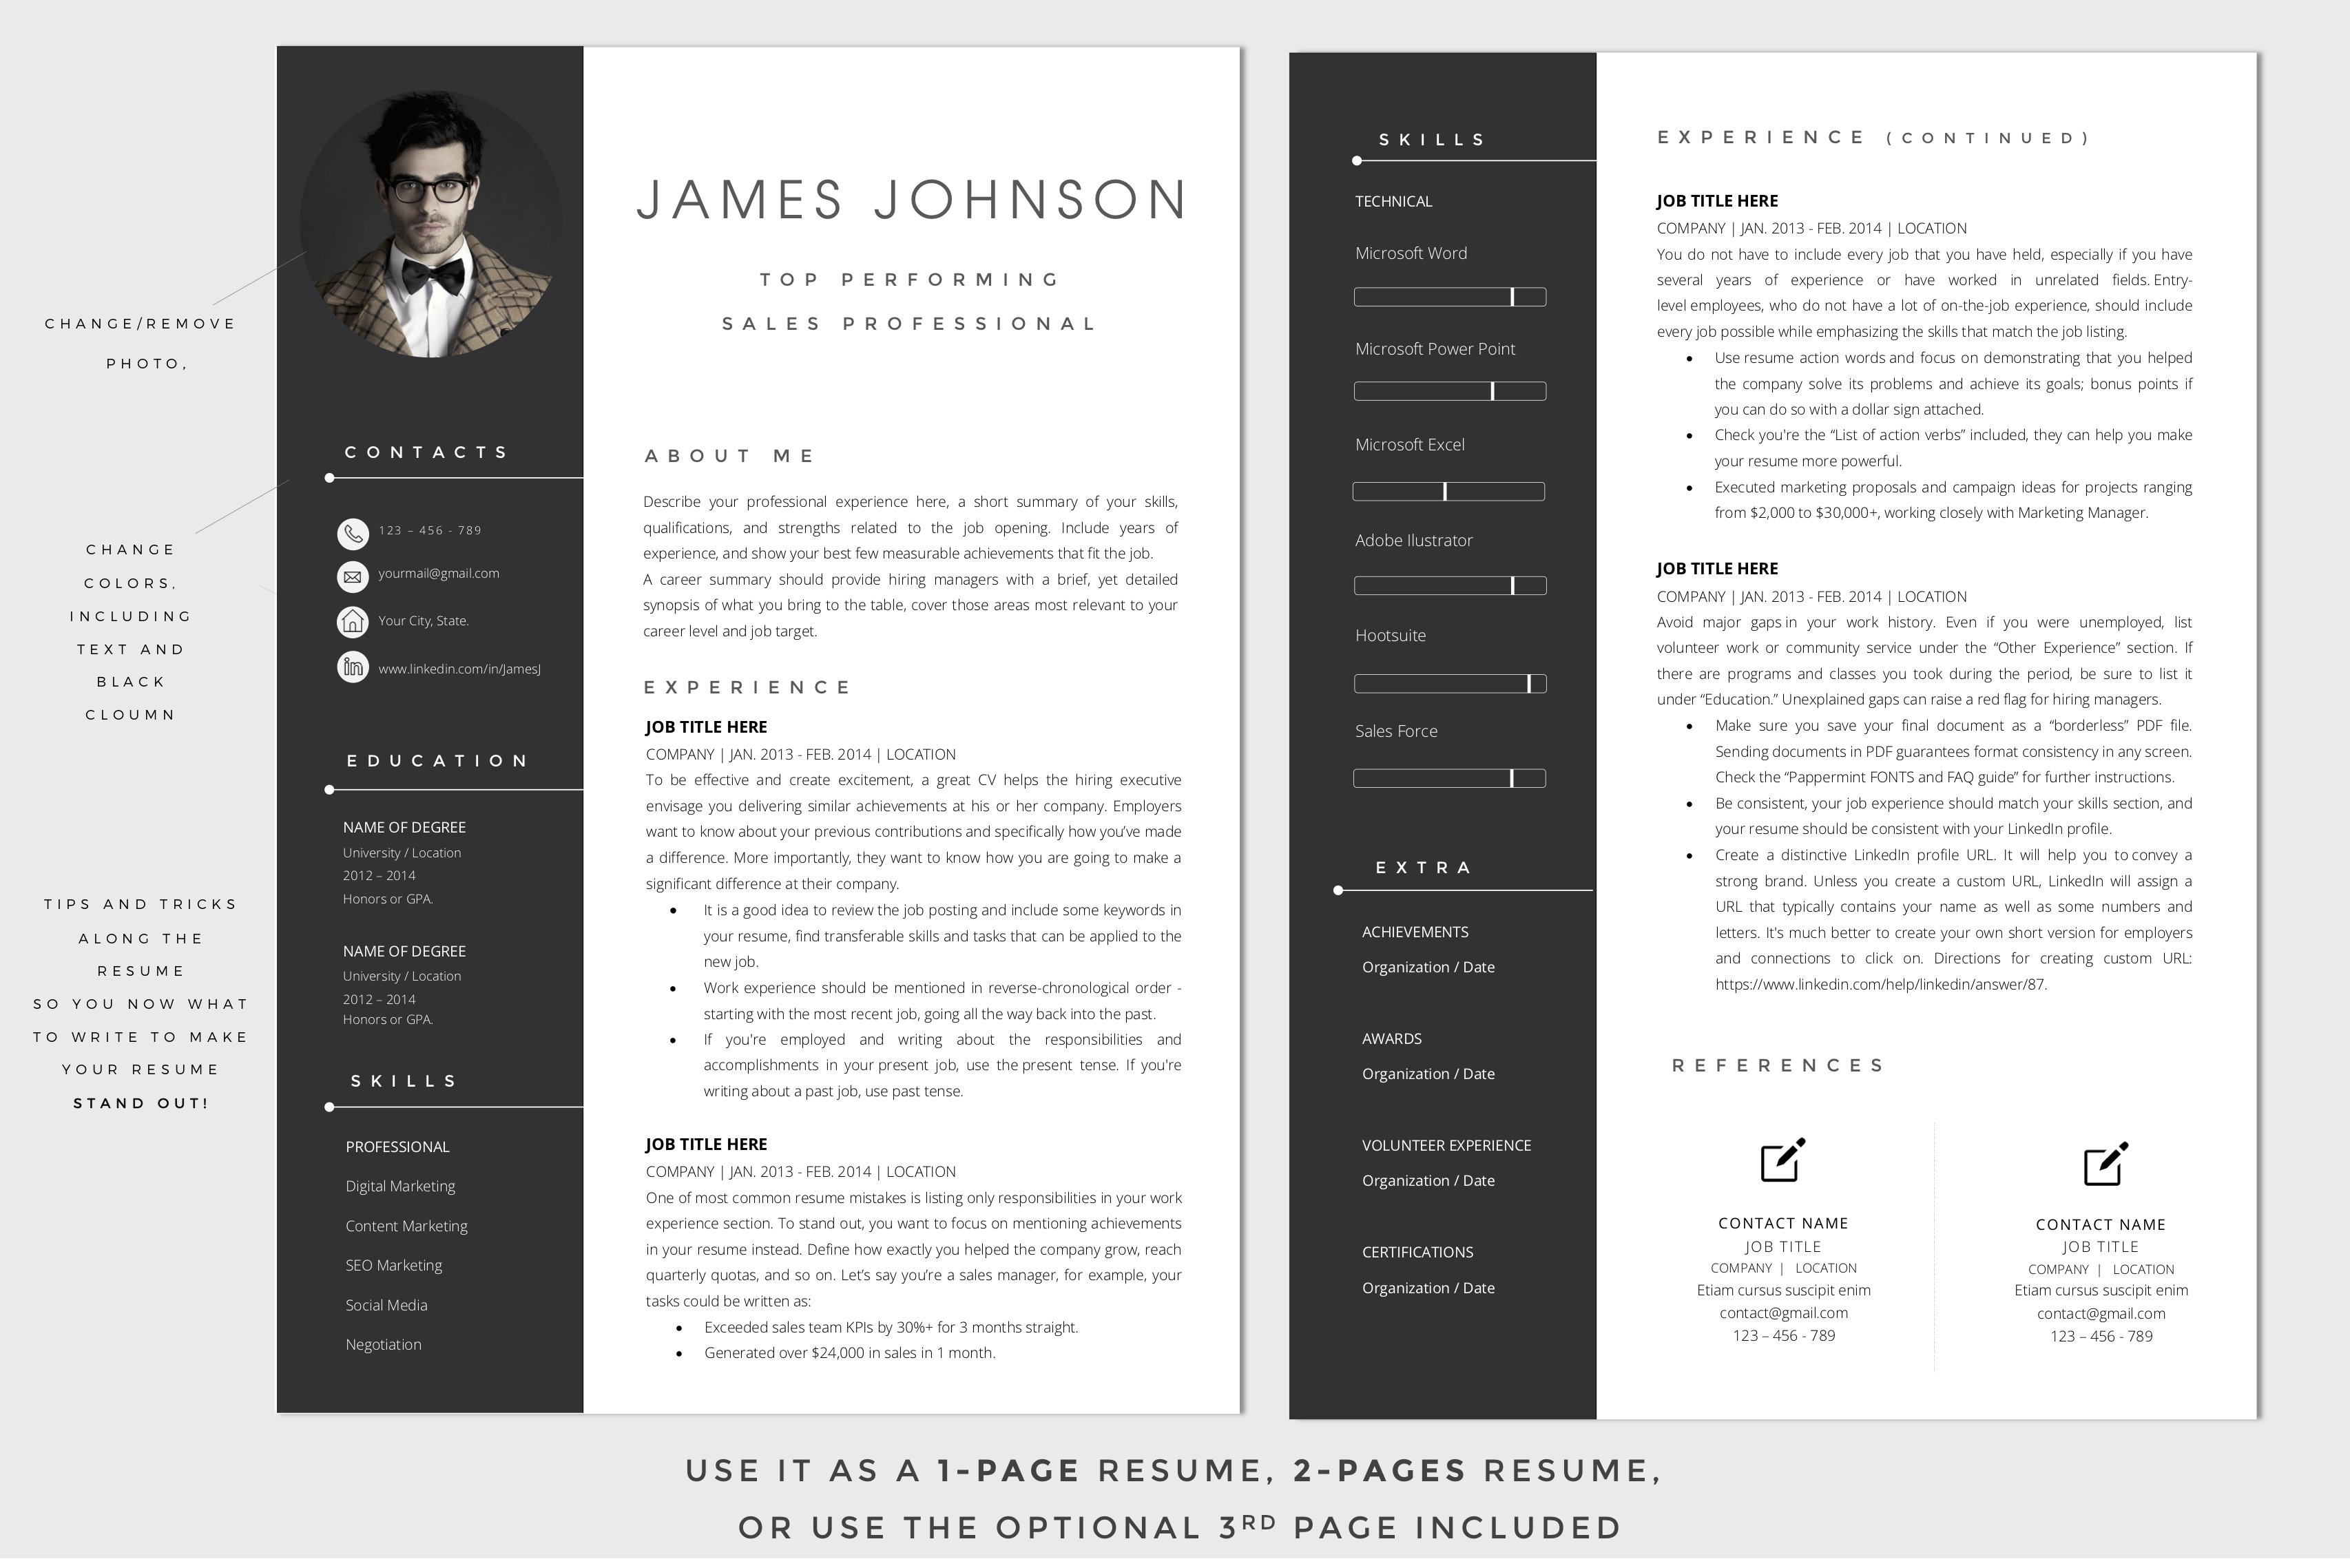 Resume Template / CV preview image.